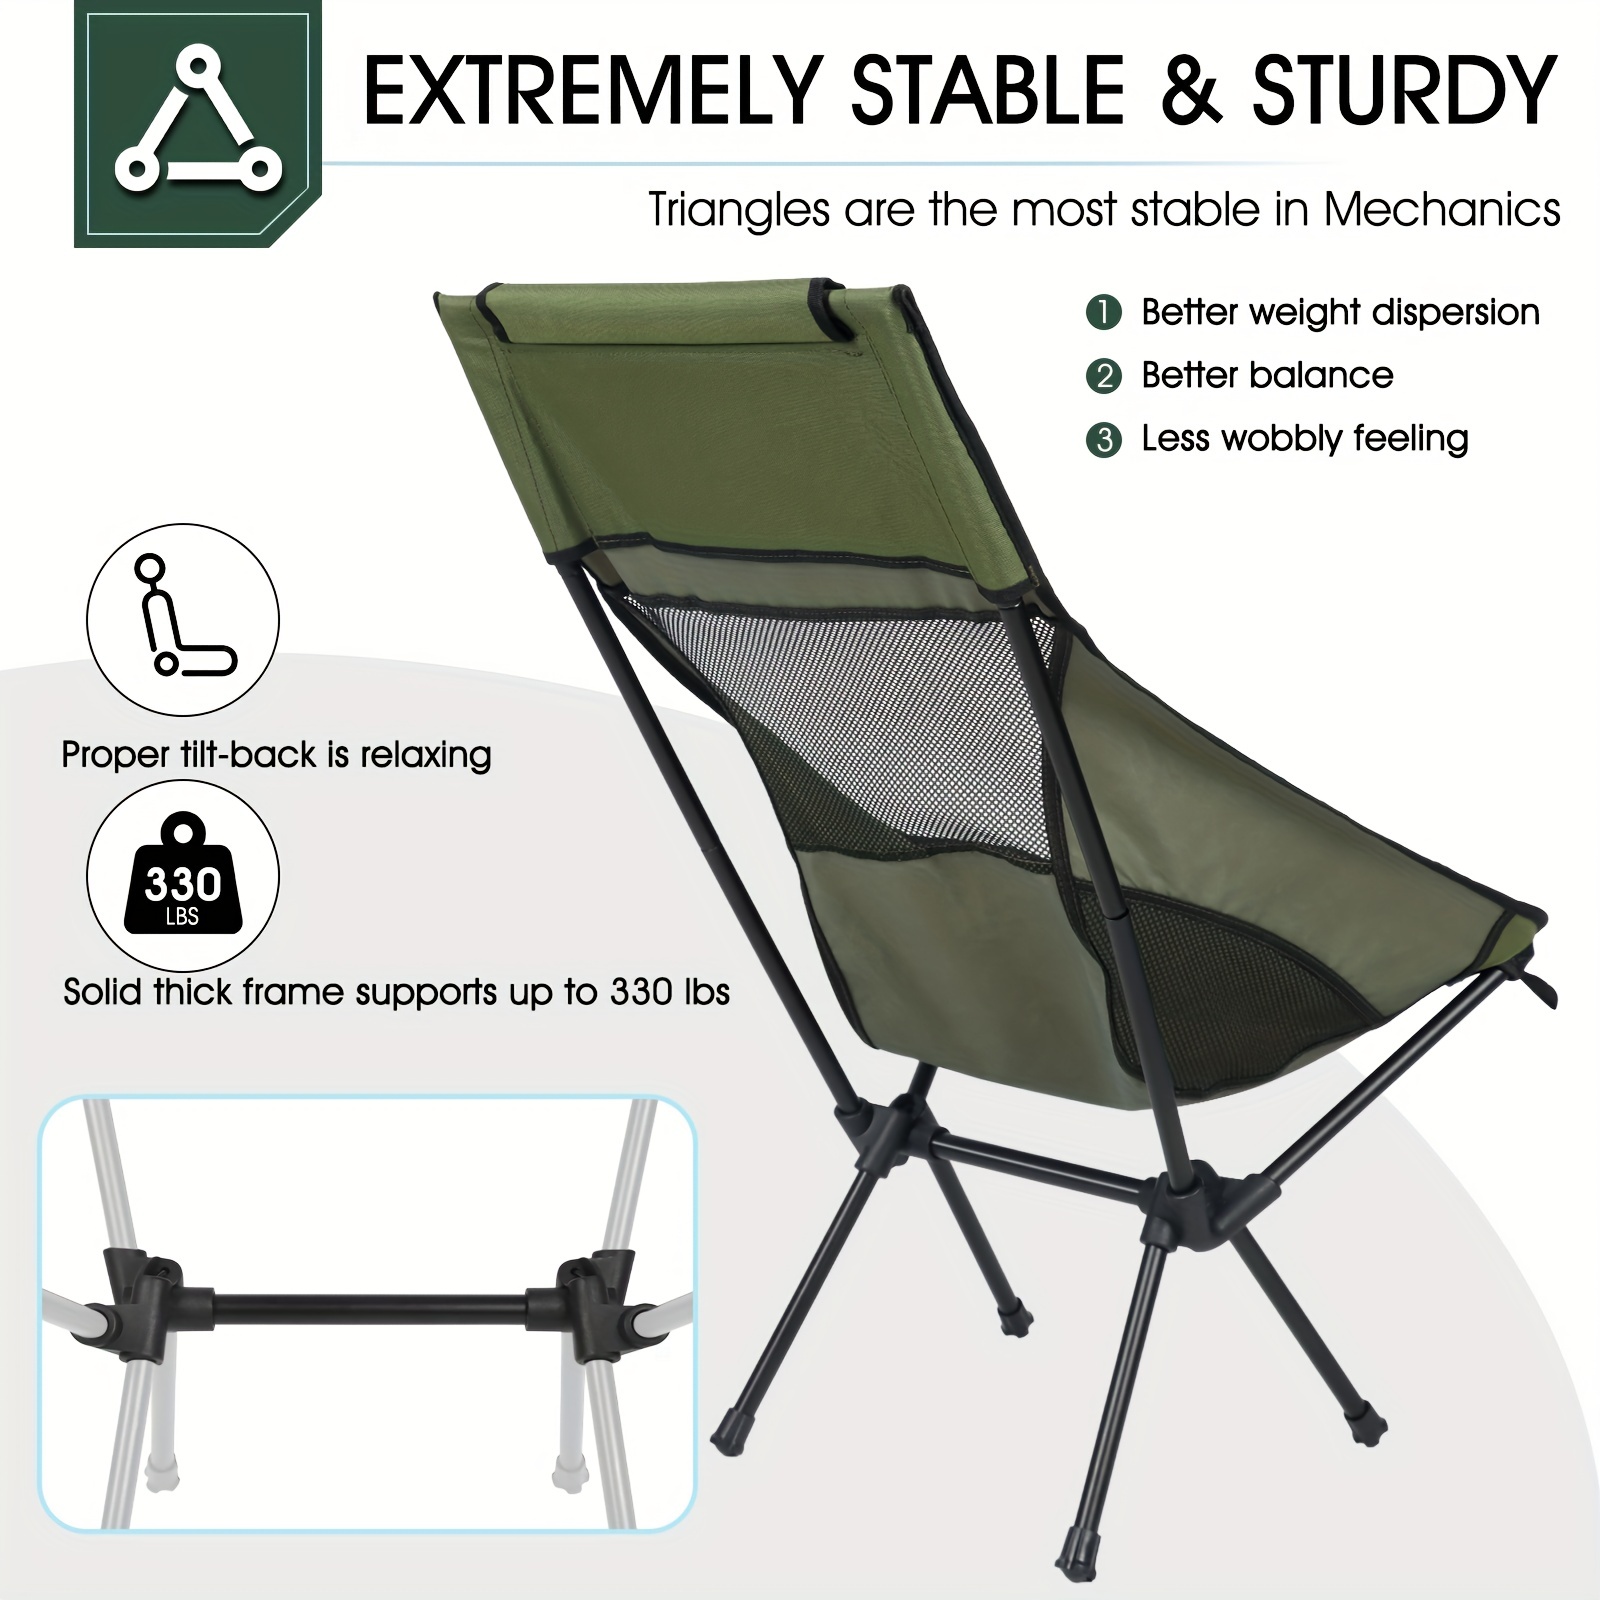 NatEtoile Folding Compact Camp Chair,Camping Gear,Portable